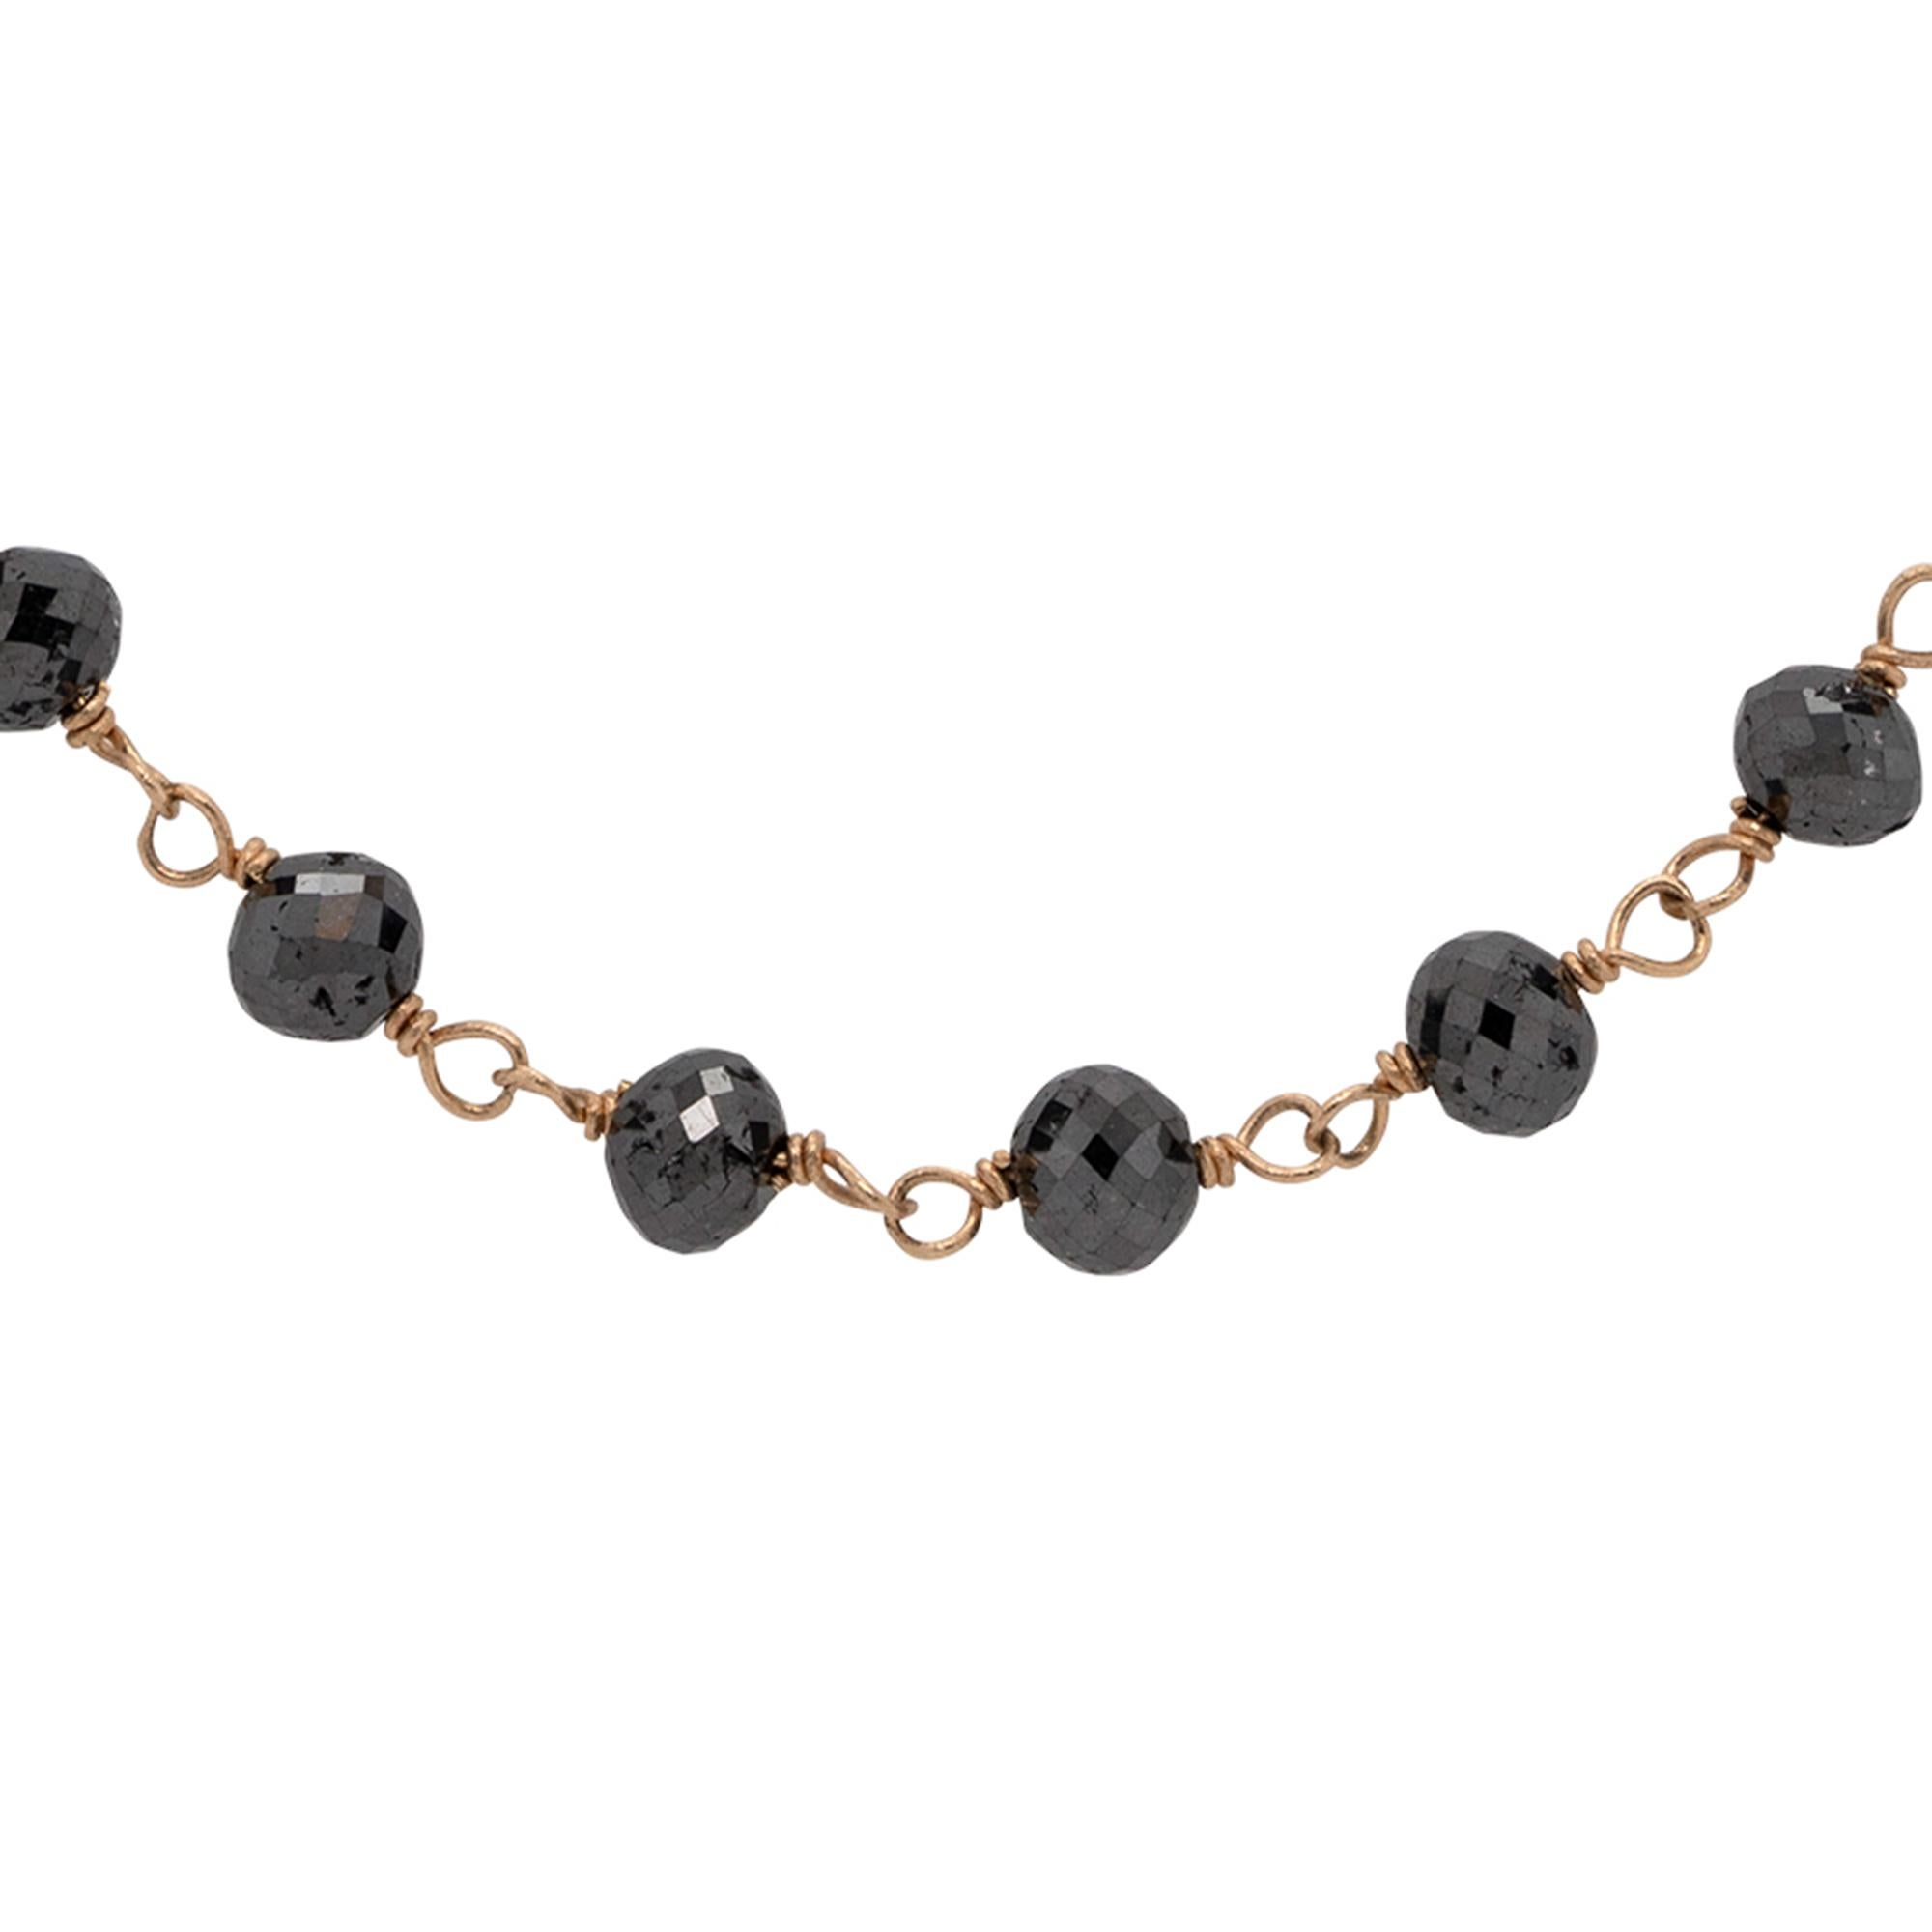 Material: 14k Yellow Gold
Diamond Details: Approx. 17ctw  of round cut faceted bead Diamonds. Diamonds are Fancy black in color
Measurements: 16 inches in length. Beads are approx. 3.25mm -3.50mm
Weight: 4.9g (3.2dwt)
Additional details: Item comes